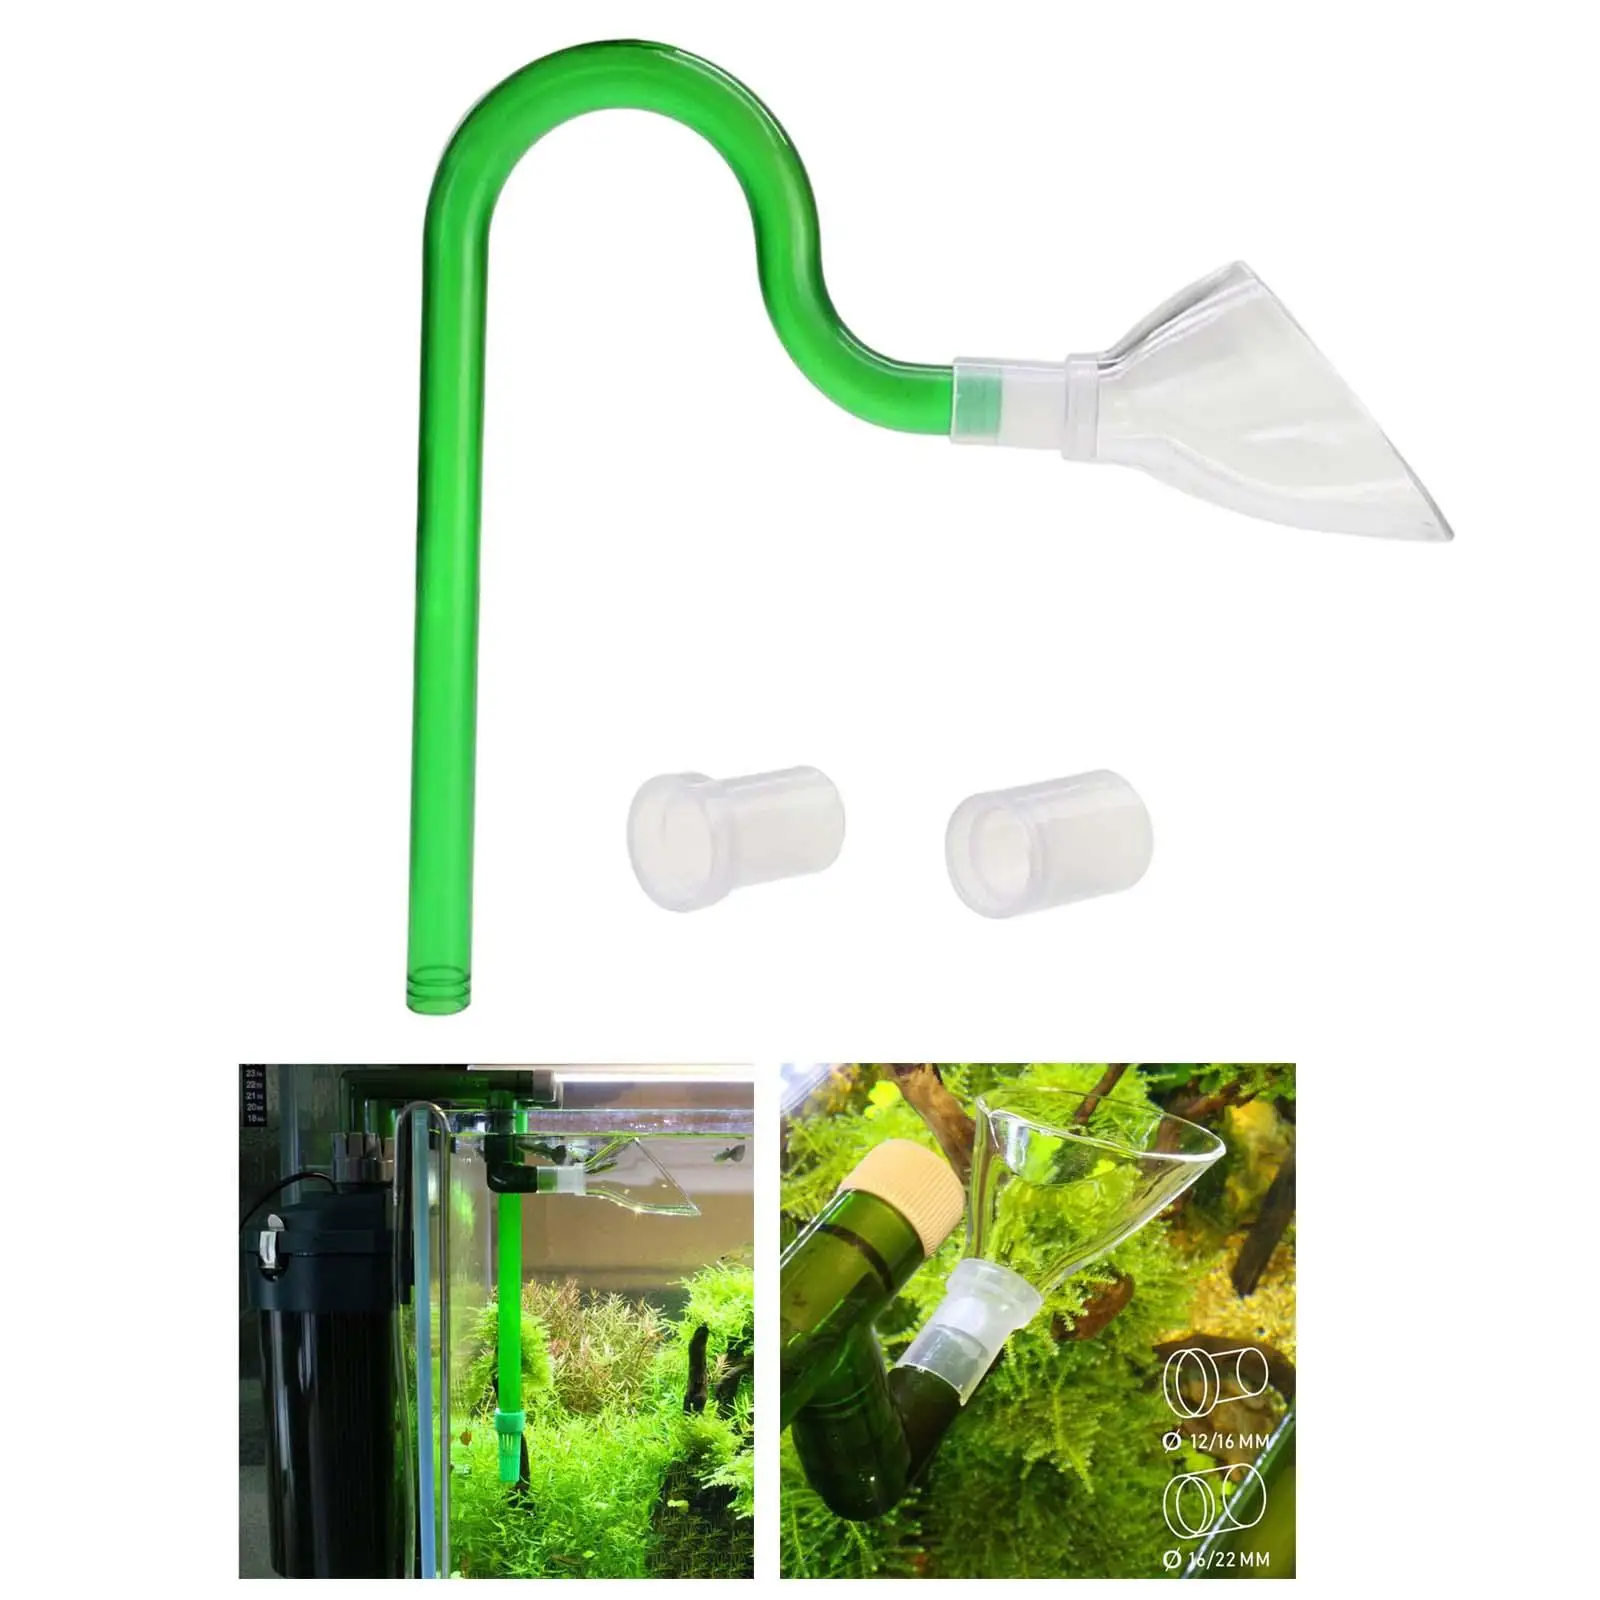 Aquarium Lily Pipe Outflow Connector Adjustable Supplies for Aquatic Filter System Planted Tank Water Tank Surface Freshwater